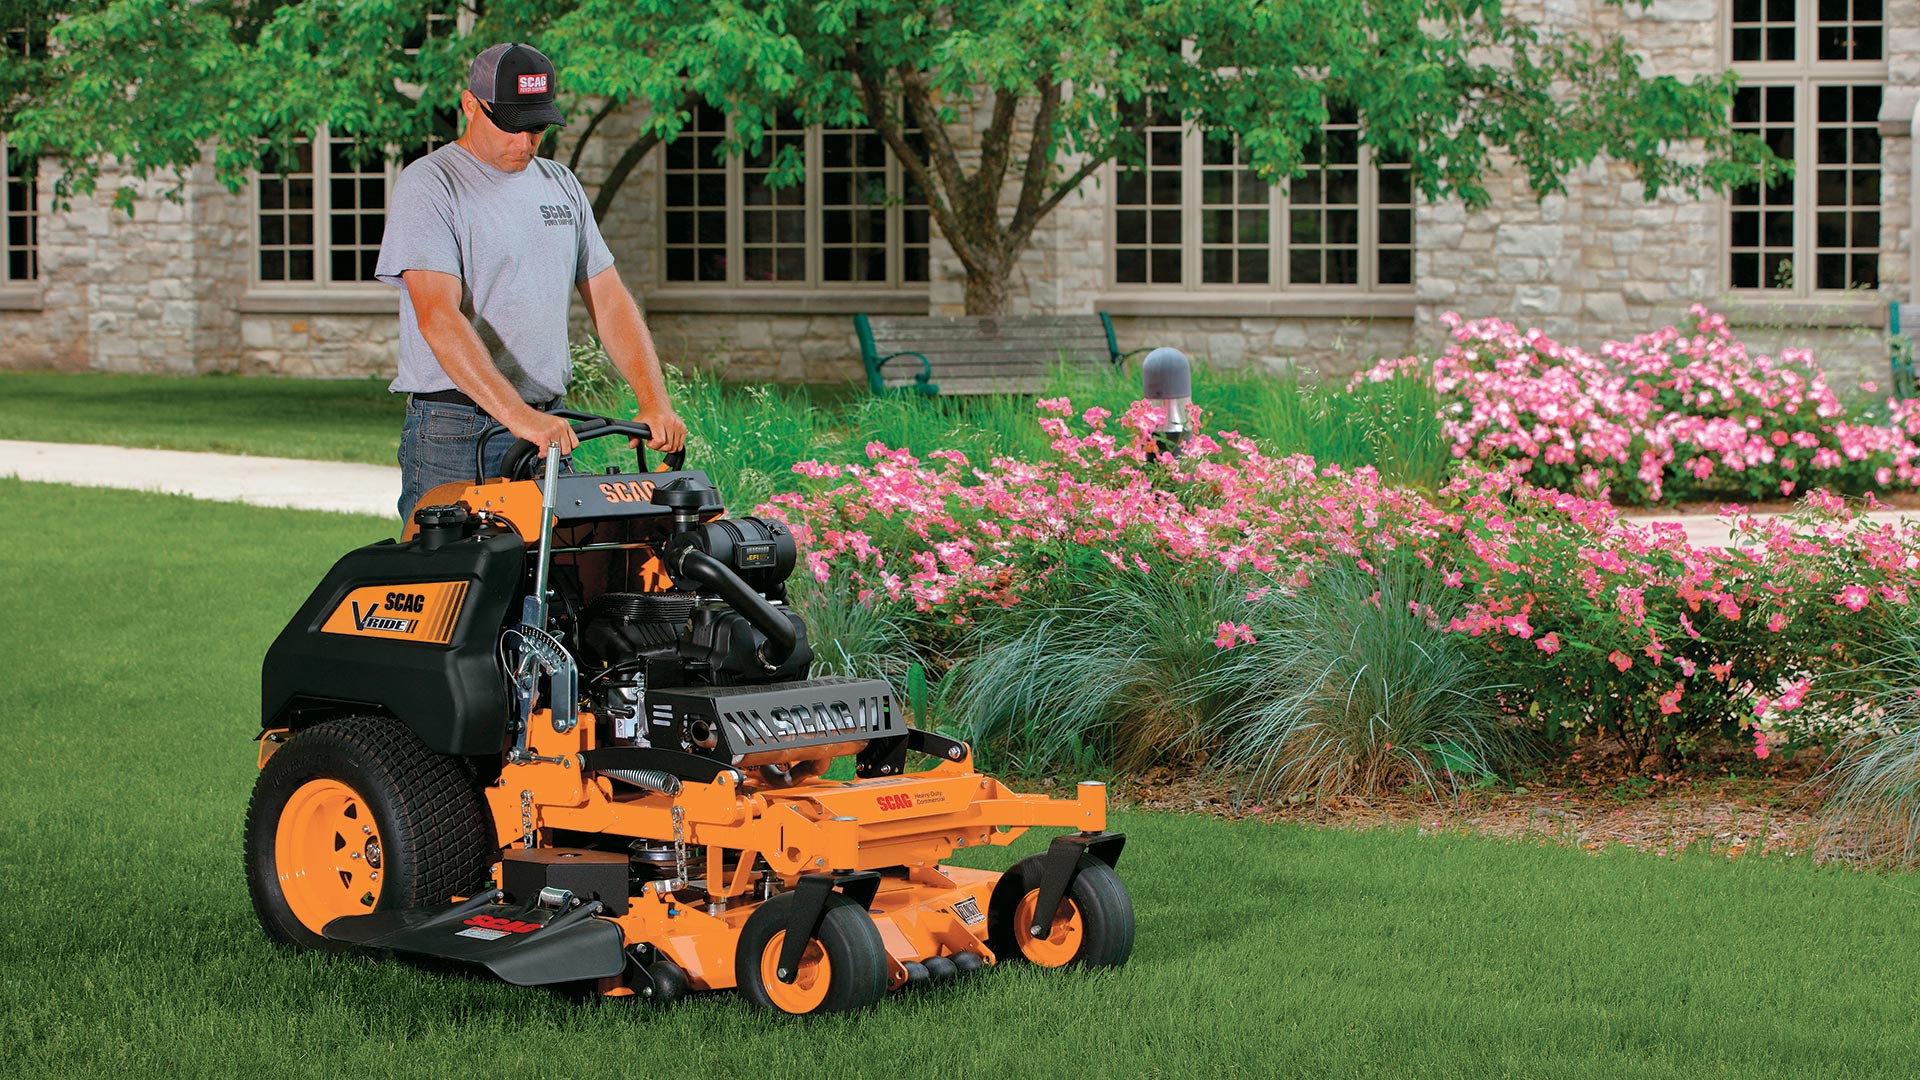 Stand Up Vs Sit Down Zero Turn Mower: Best Pick for Your Lawn!